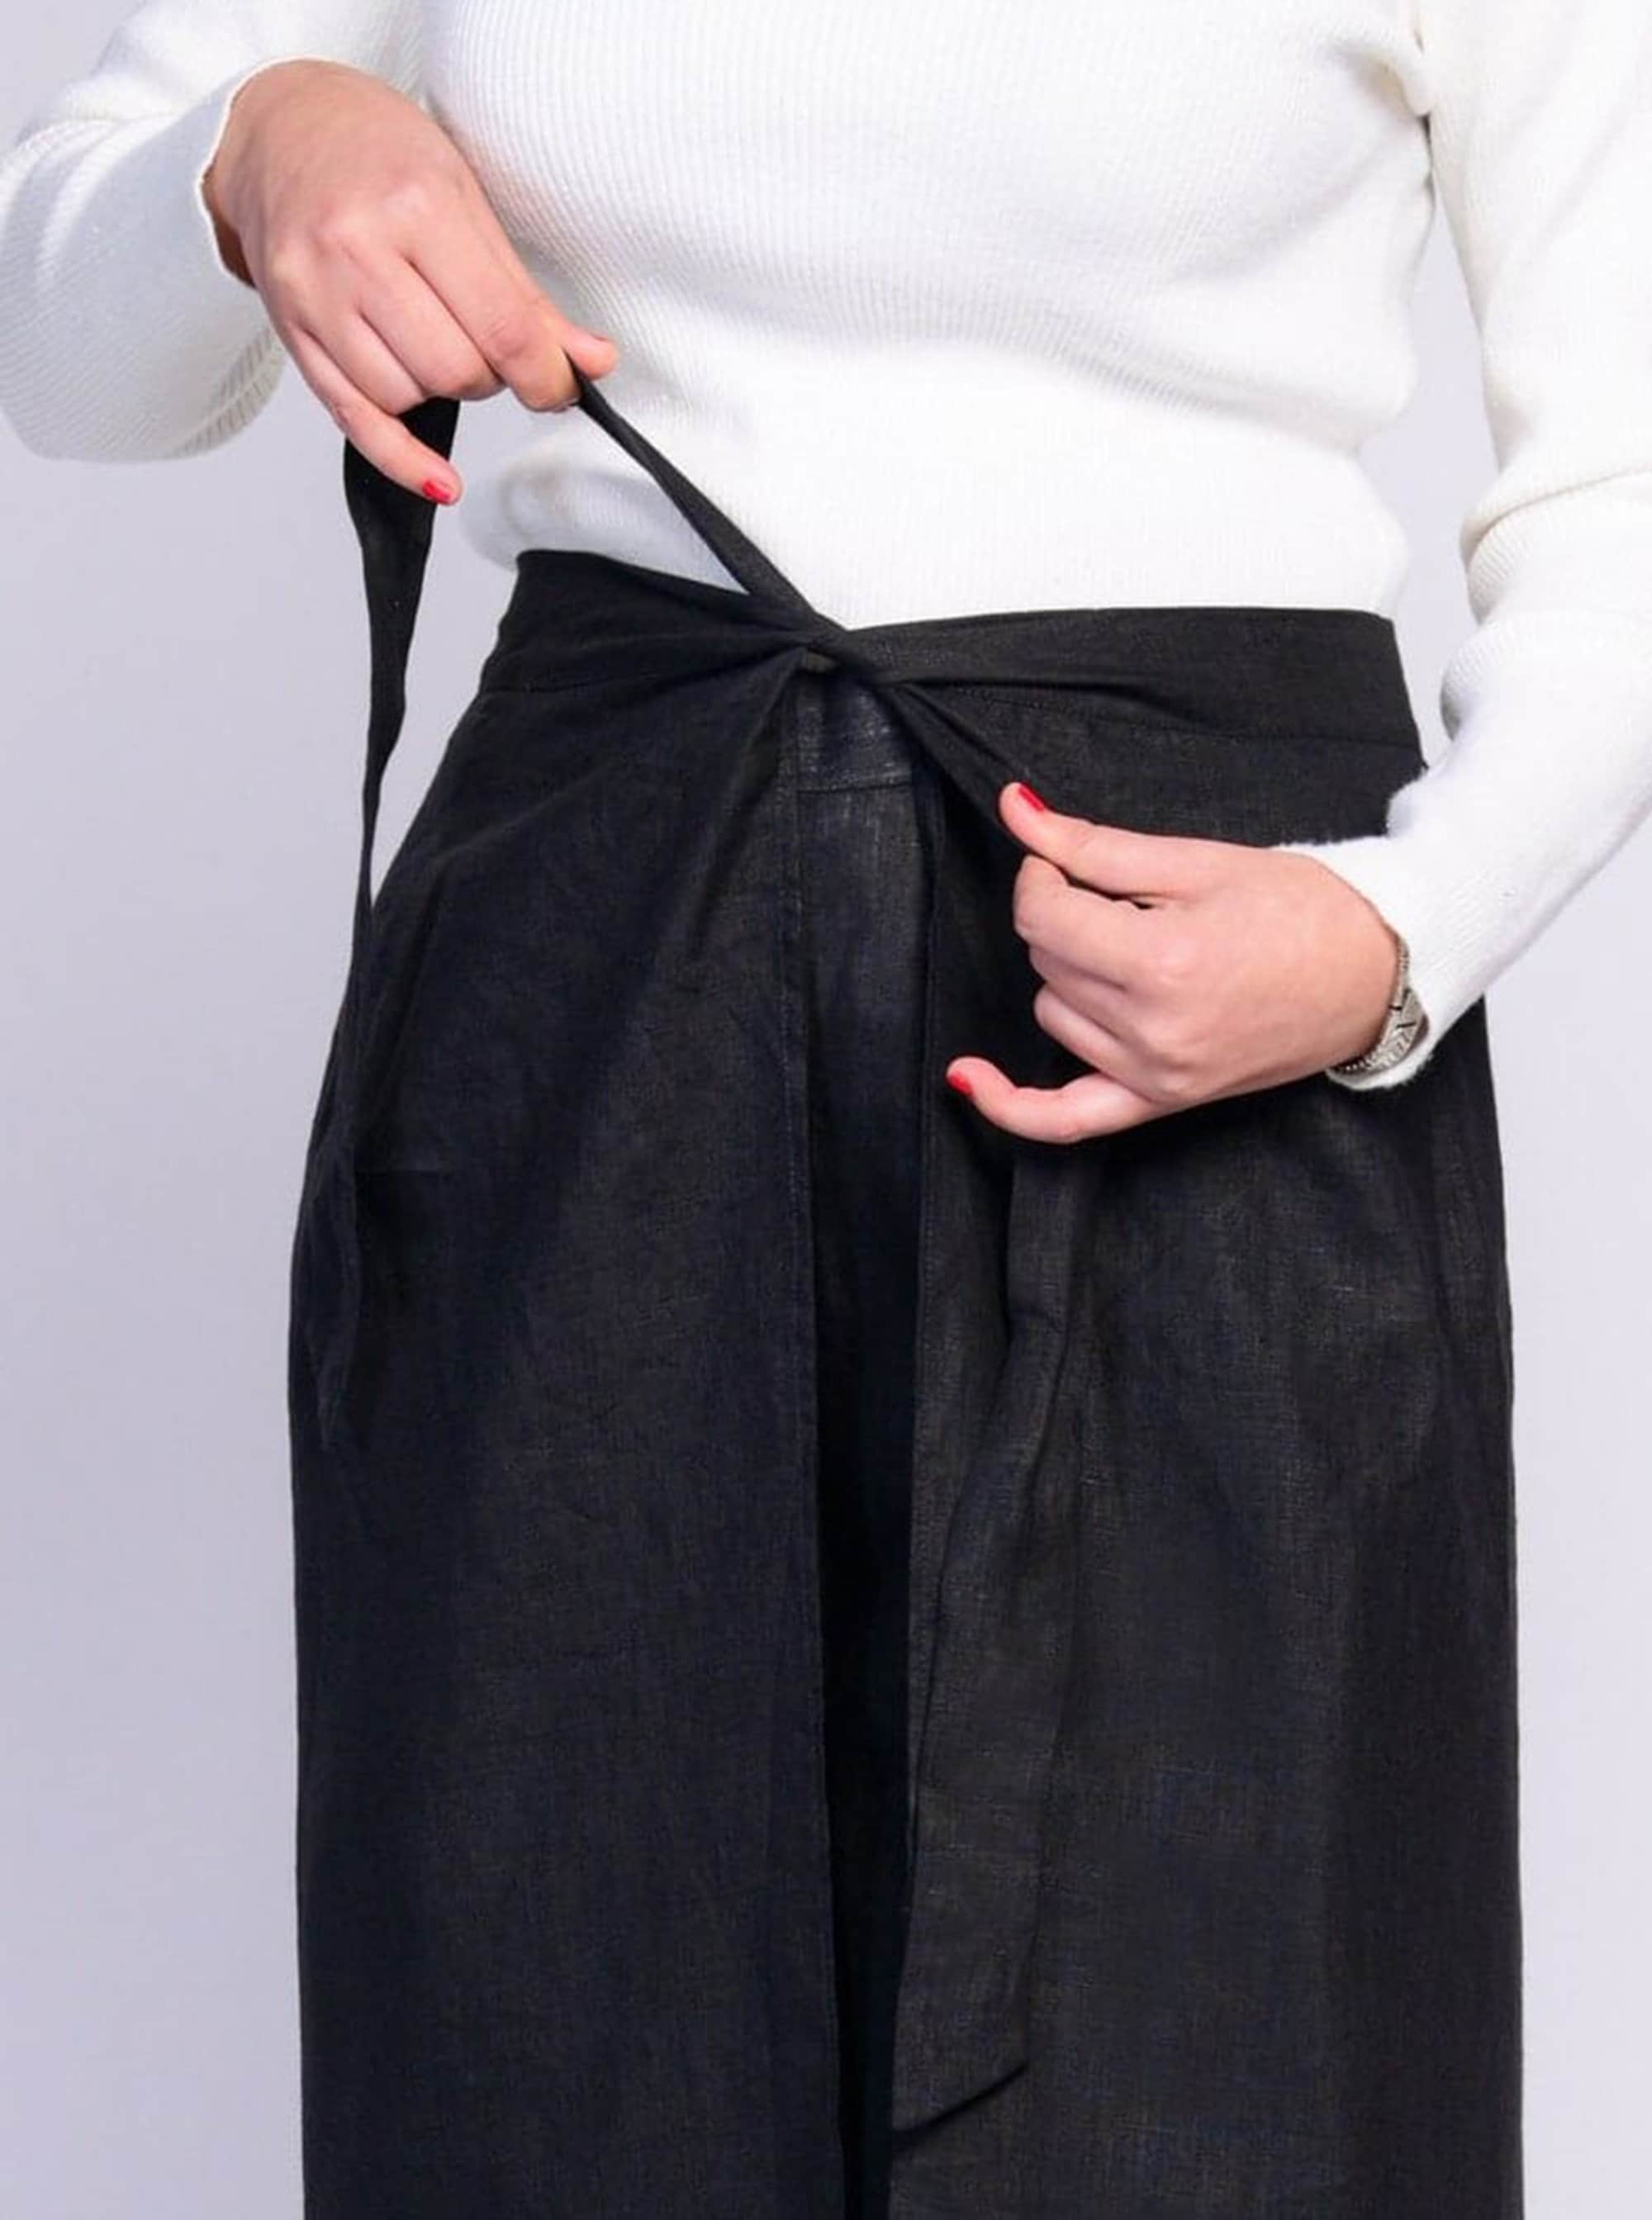 Buy Solid Color Wrap Pants, Lightweight and Flowy Wrap Around